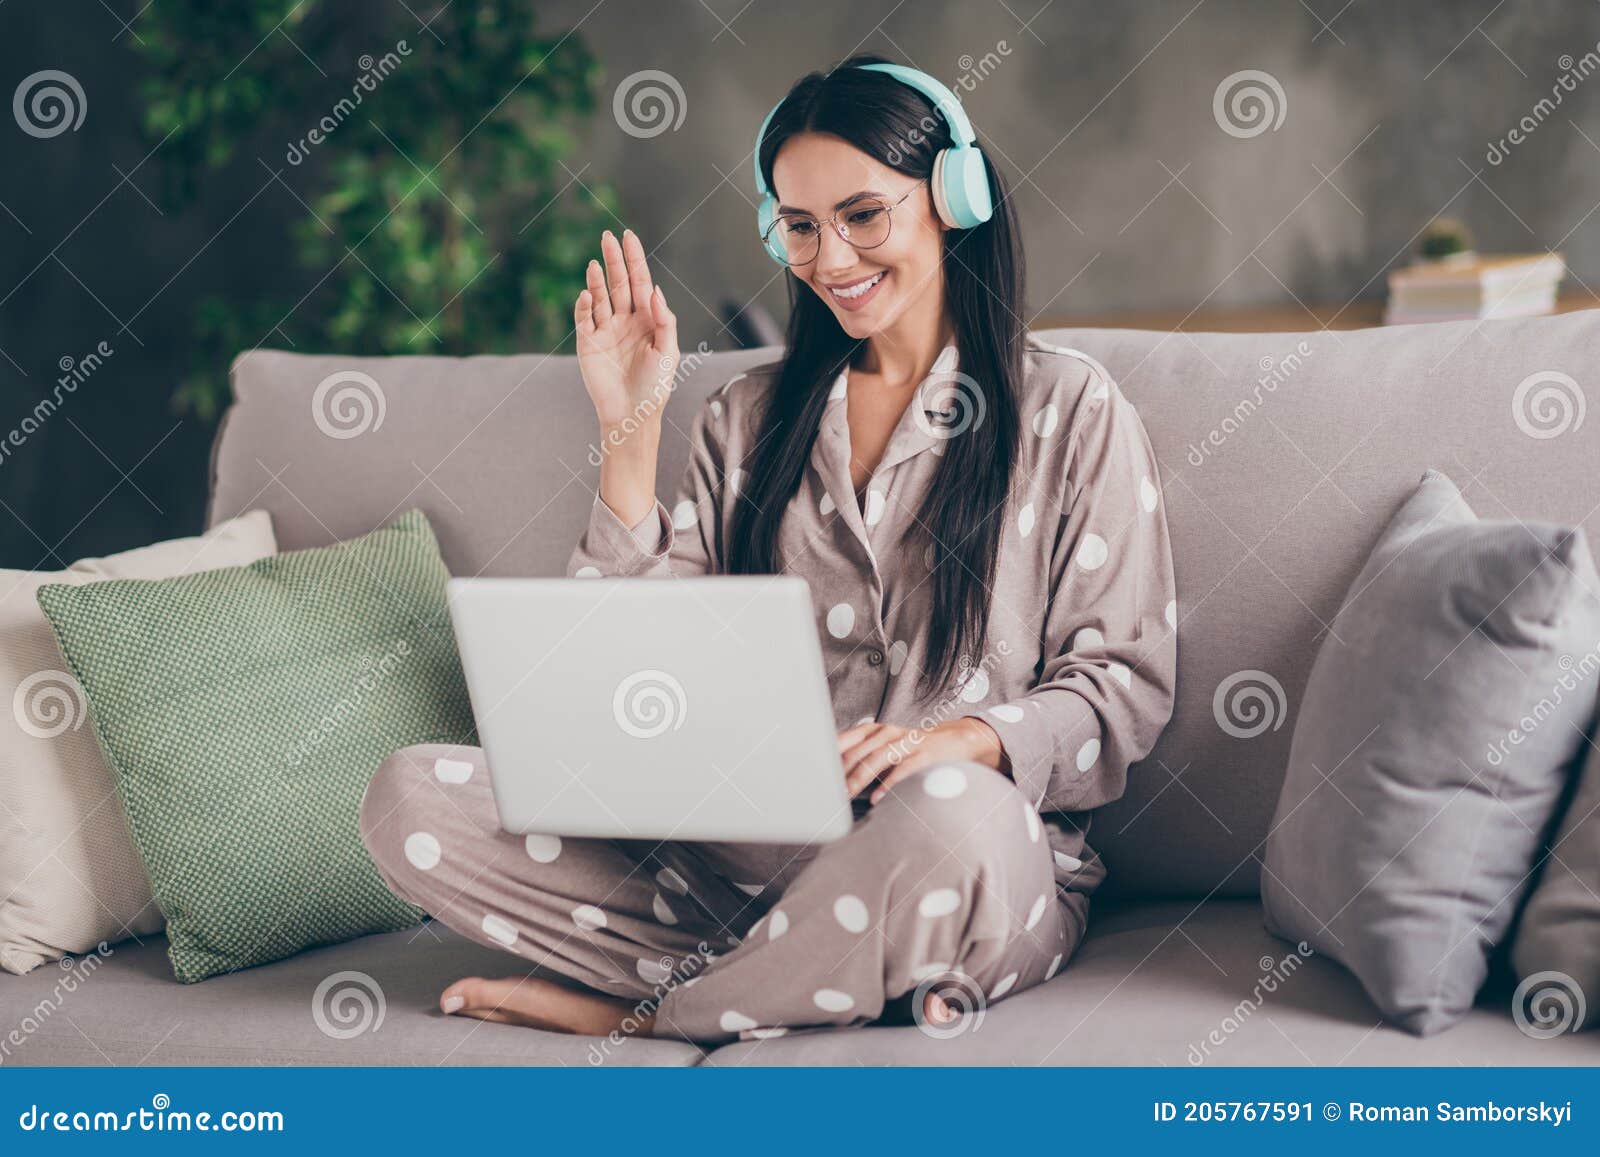 photo of nice optimistic girl sit talk laptop wave hand wear spectacles headphones pijama at home